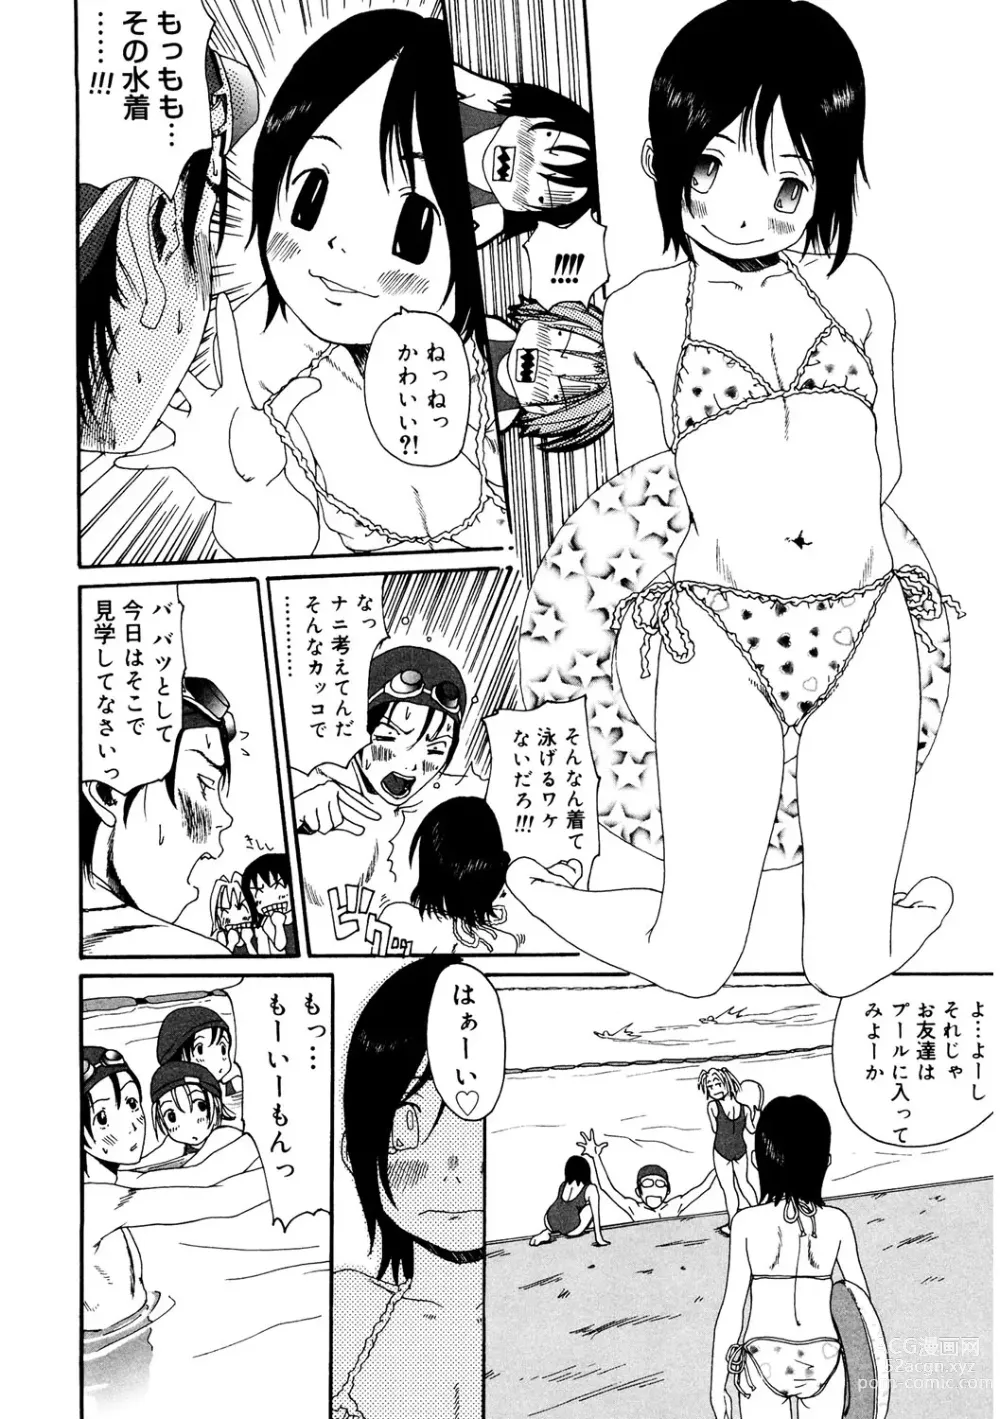 Page 186 of manga LQ -Little Queen- Vol. 52